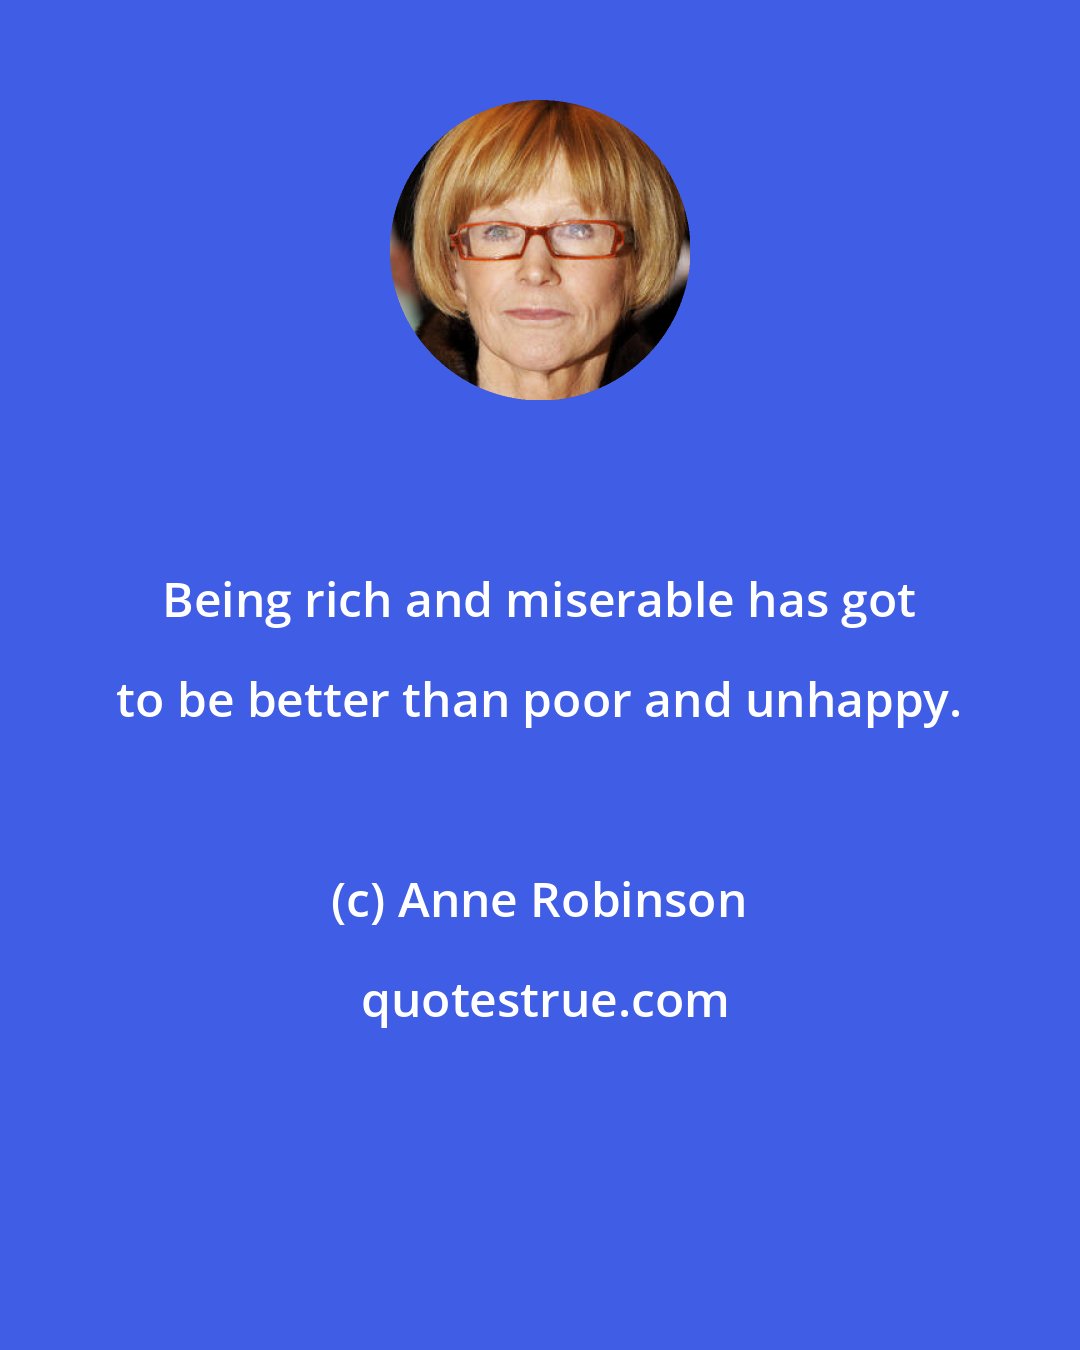 Anne Robinson: Being rich and miserable has got to be better than poor and unhappy.